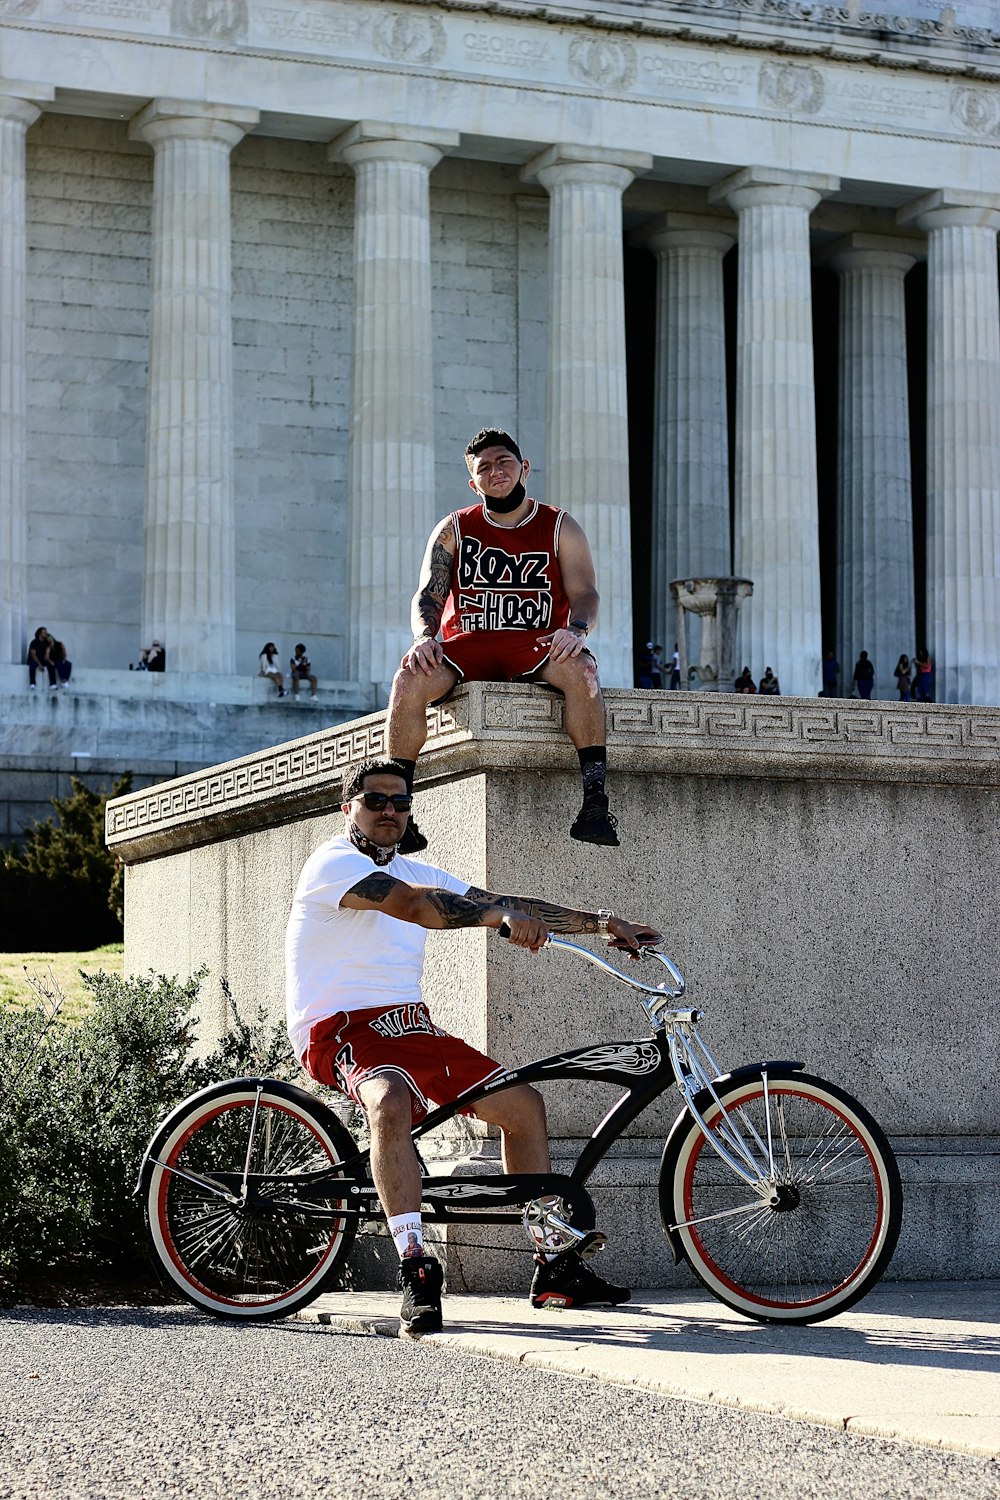 man in red and white tank top riding on red bicycle during daytime